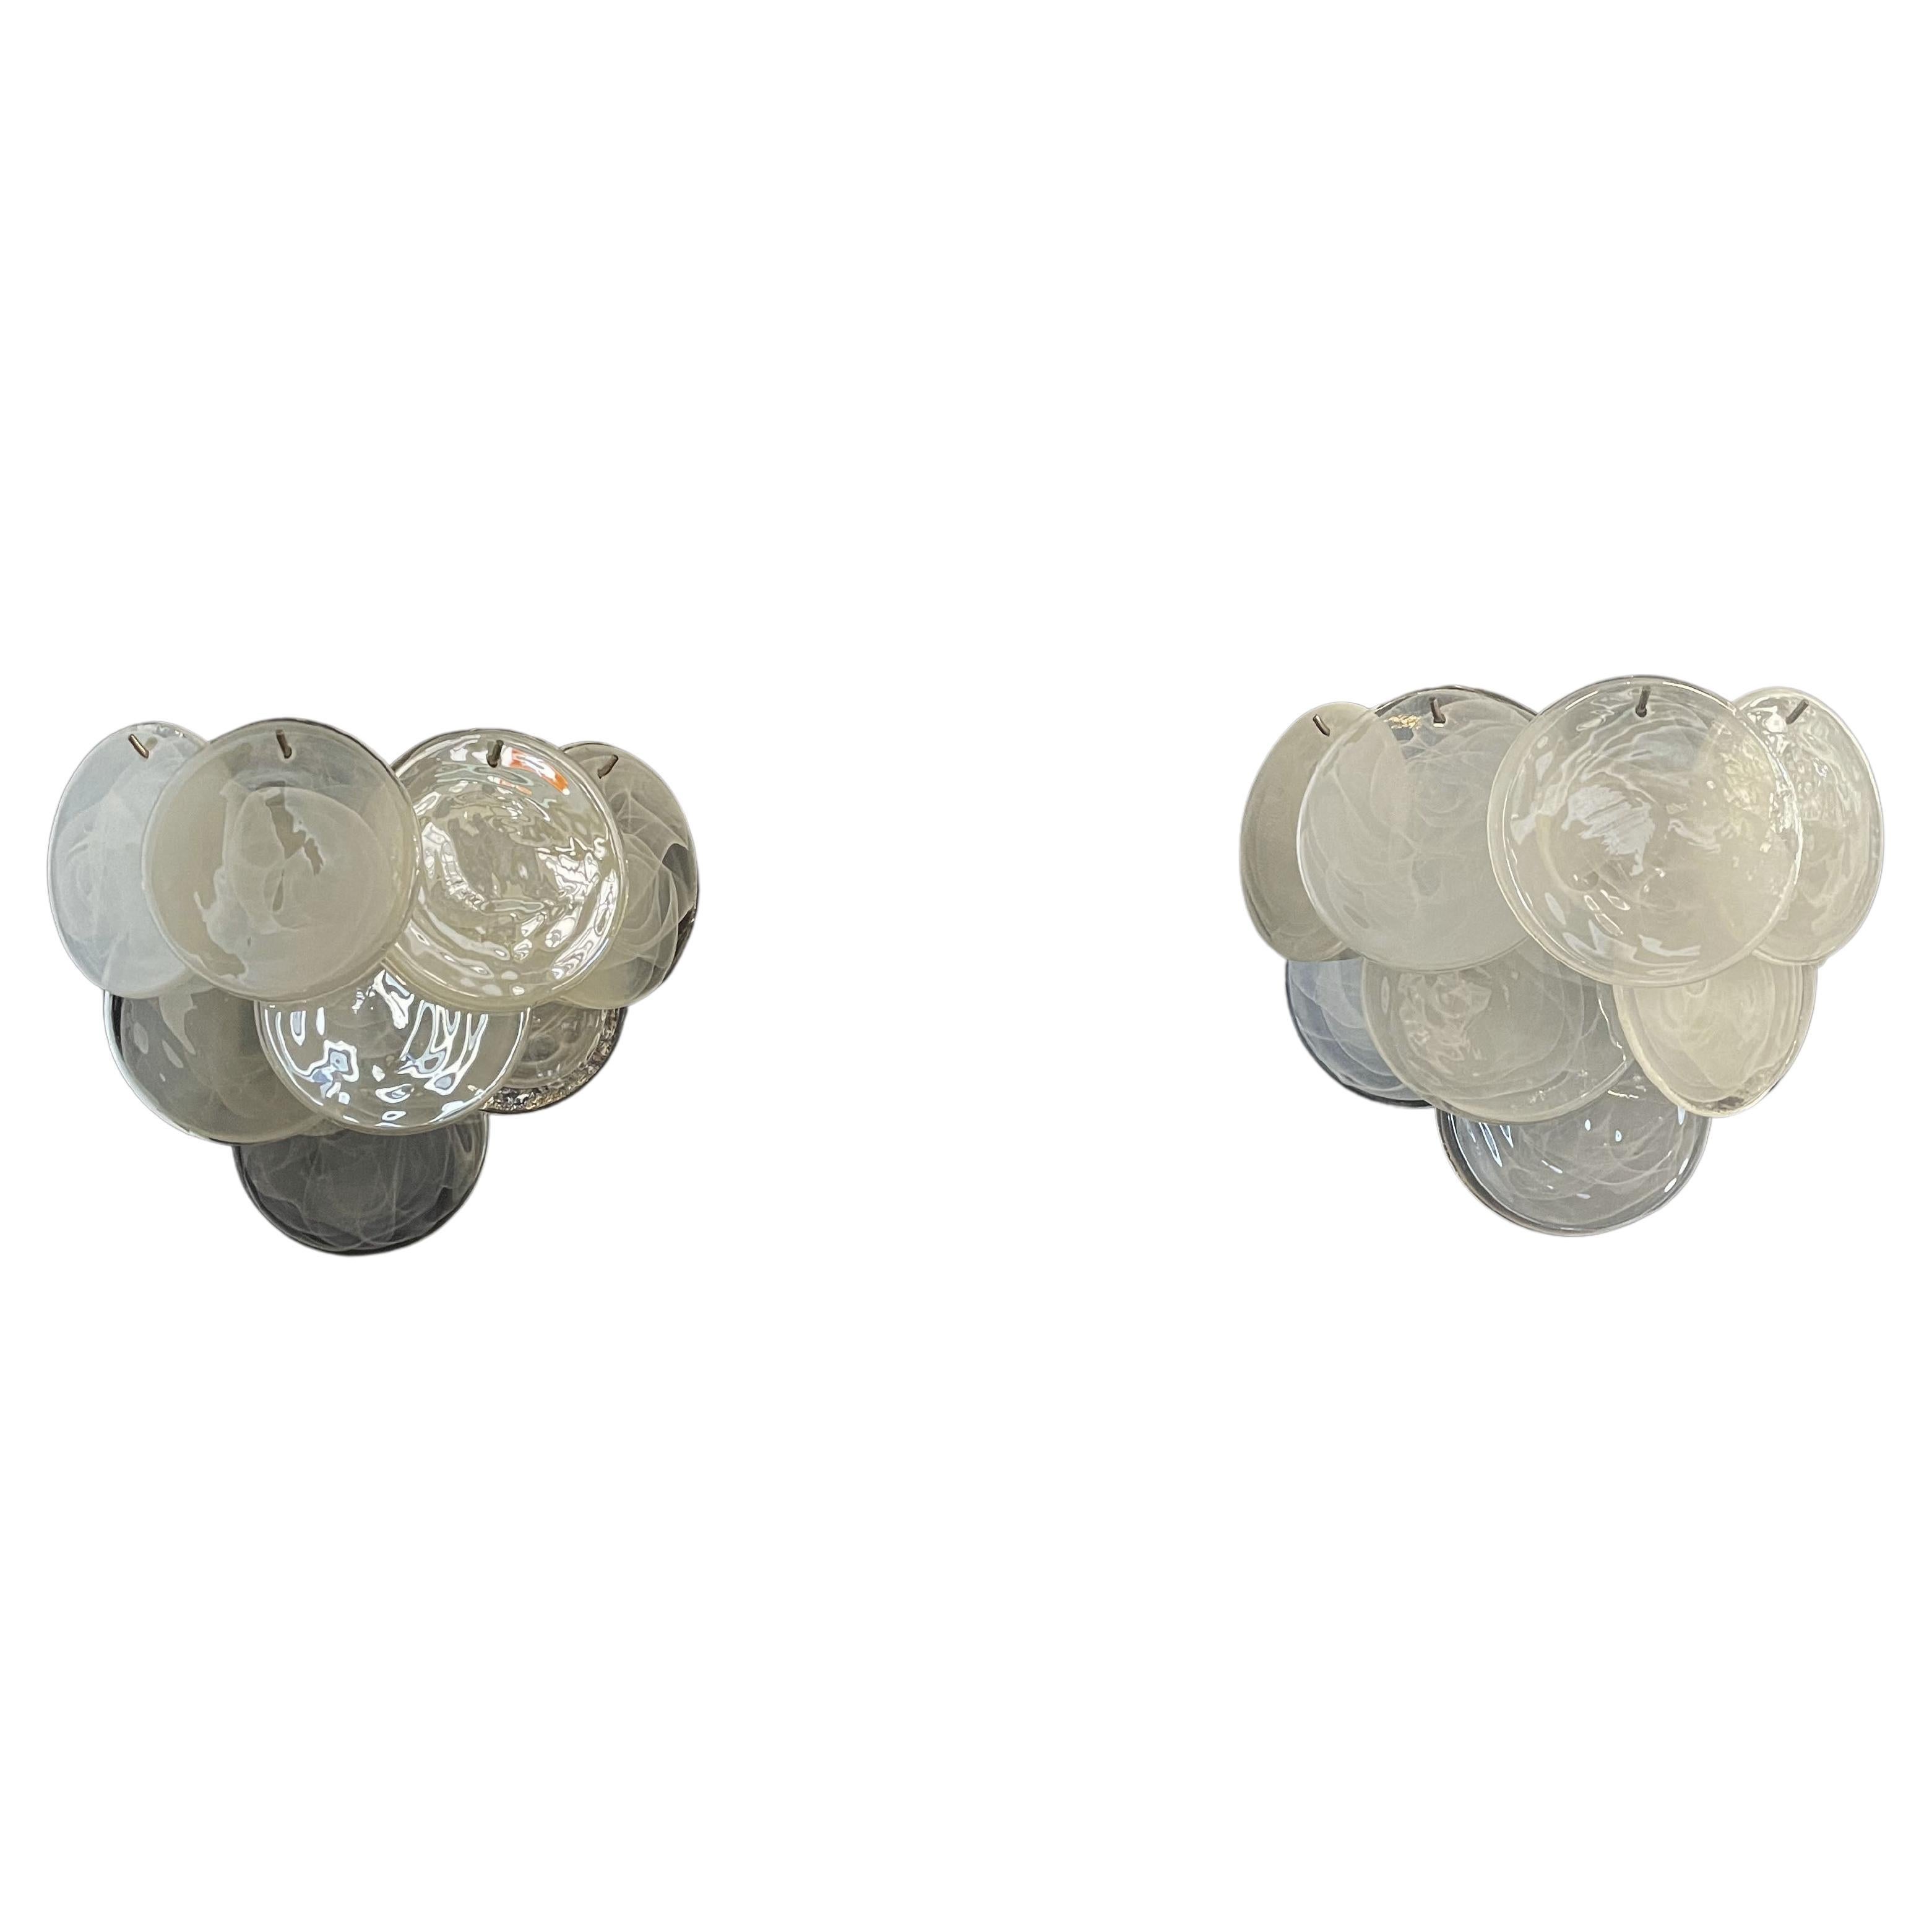 Pair of Glass Wall Sconces, 10 Alabaster White Disks